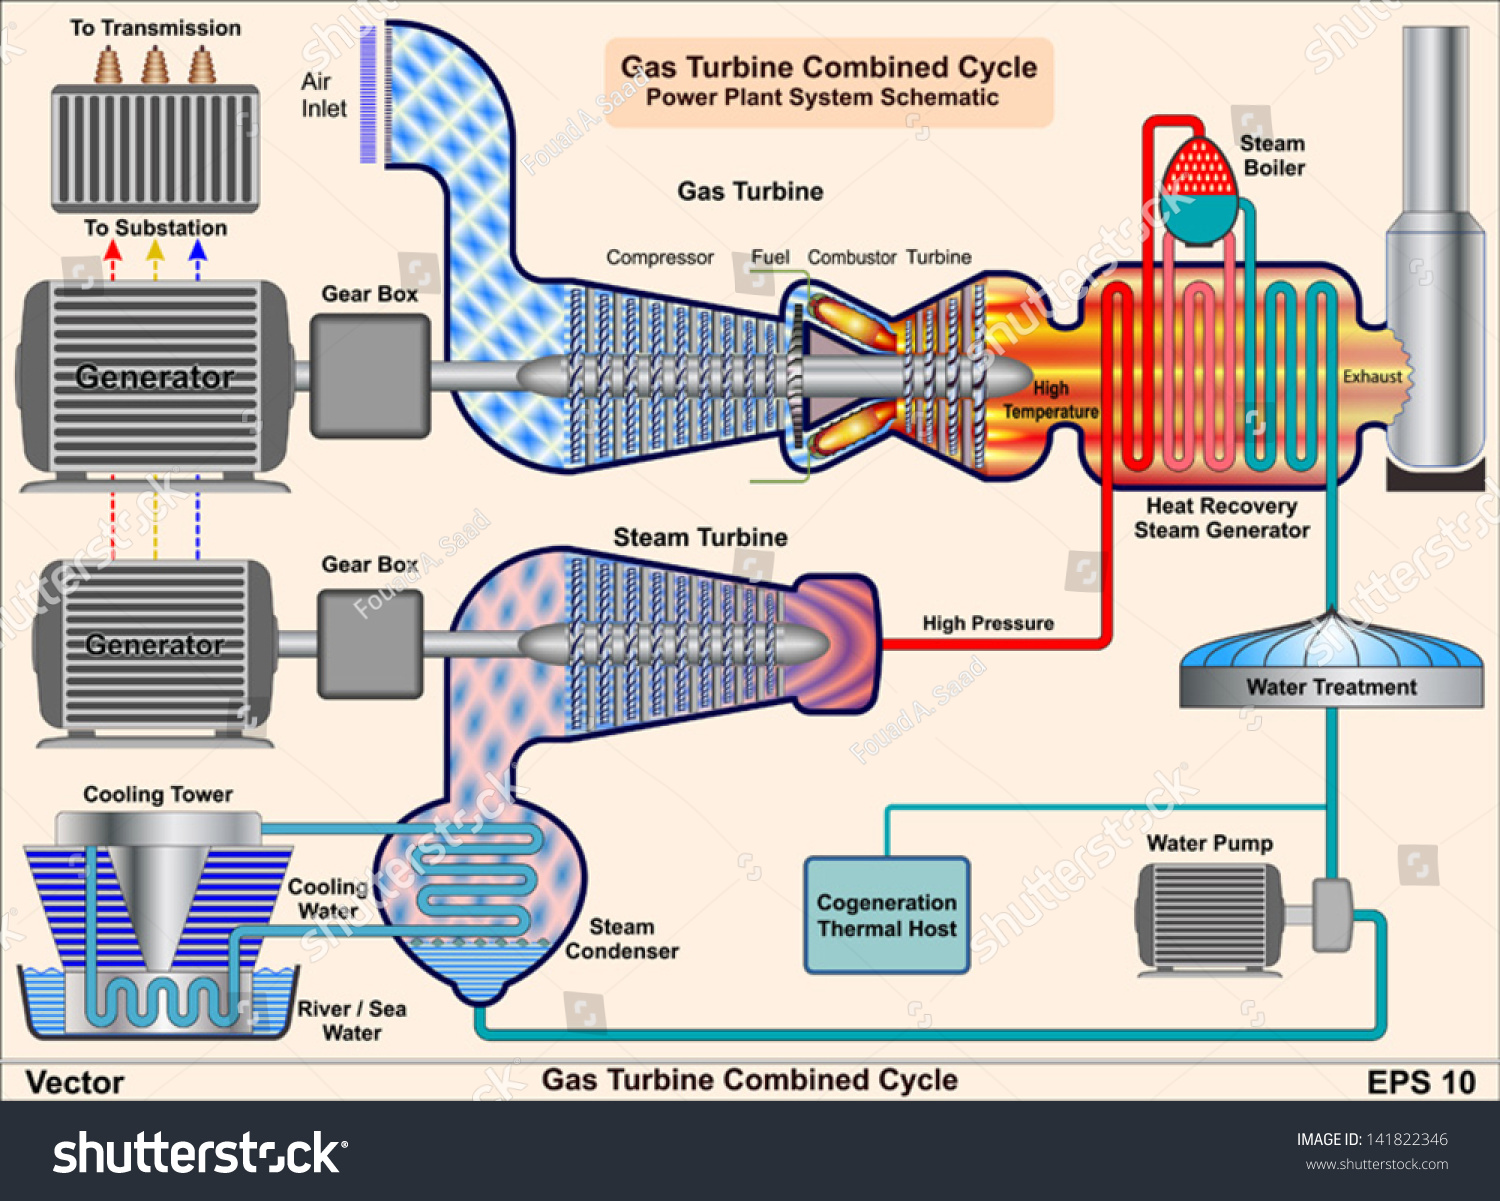 Gas Turbine Combined Cycle Power Plant System Schematic Illustration ...